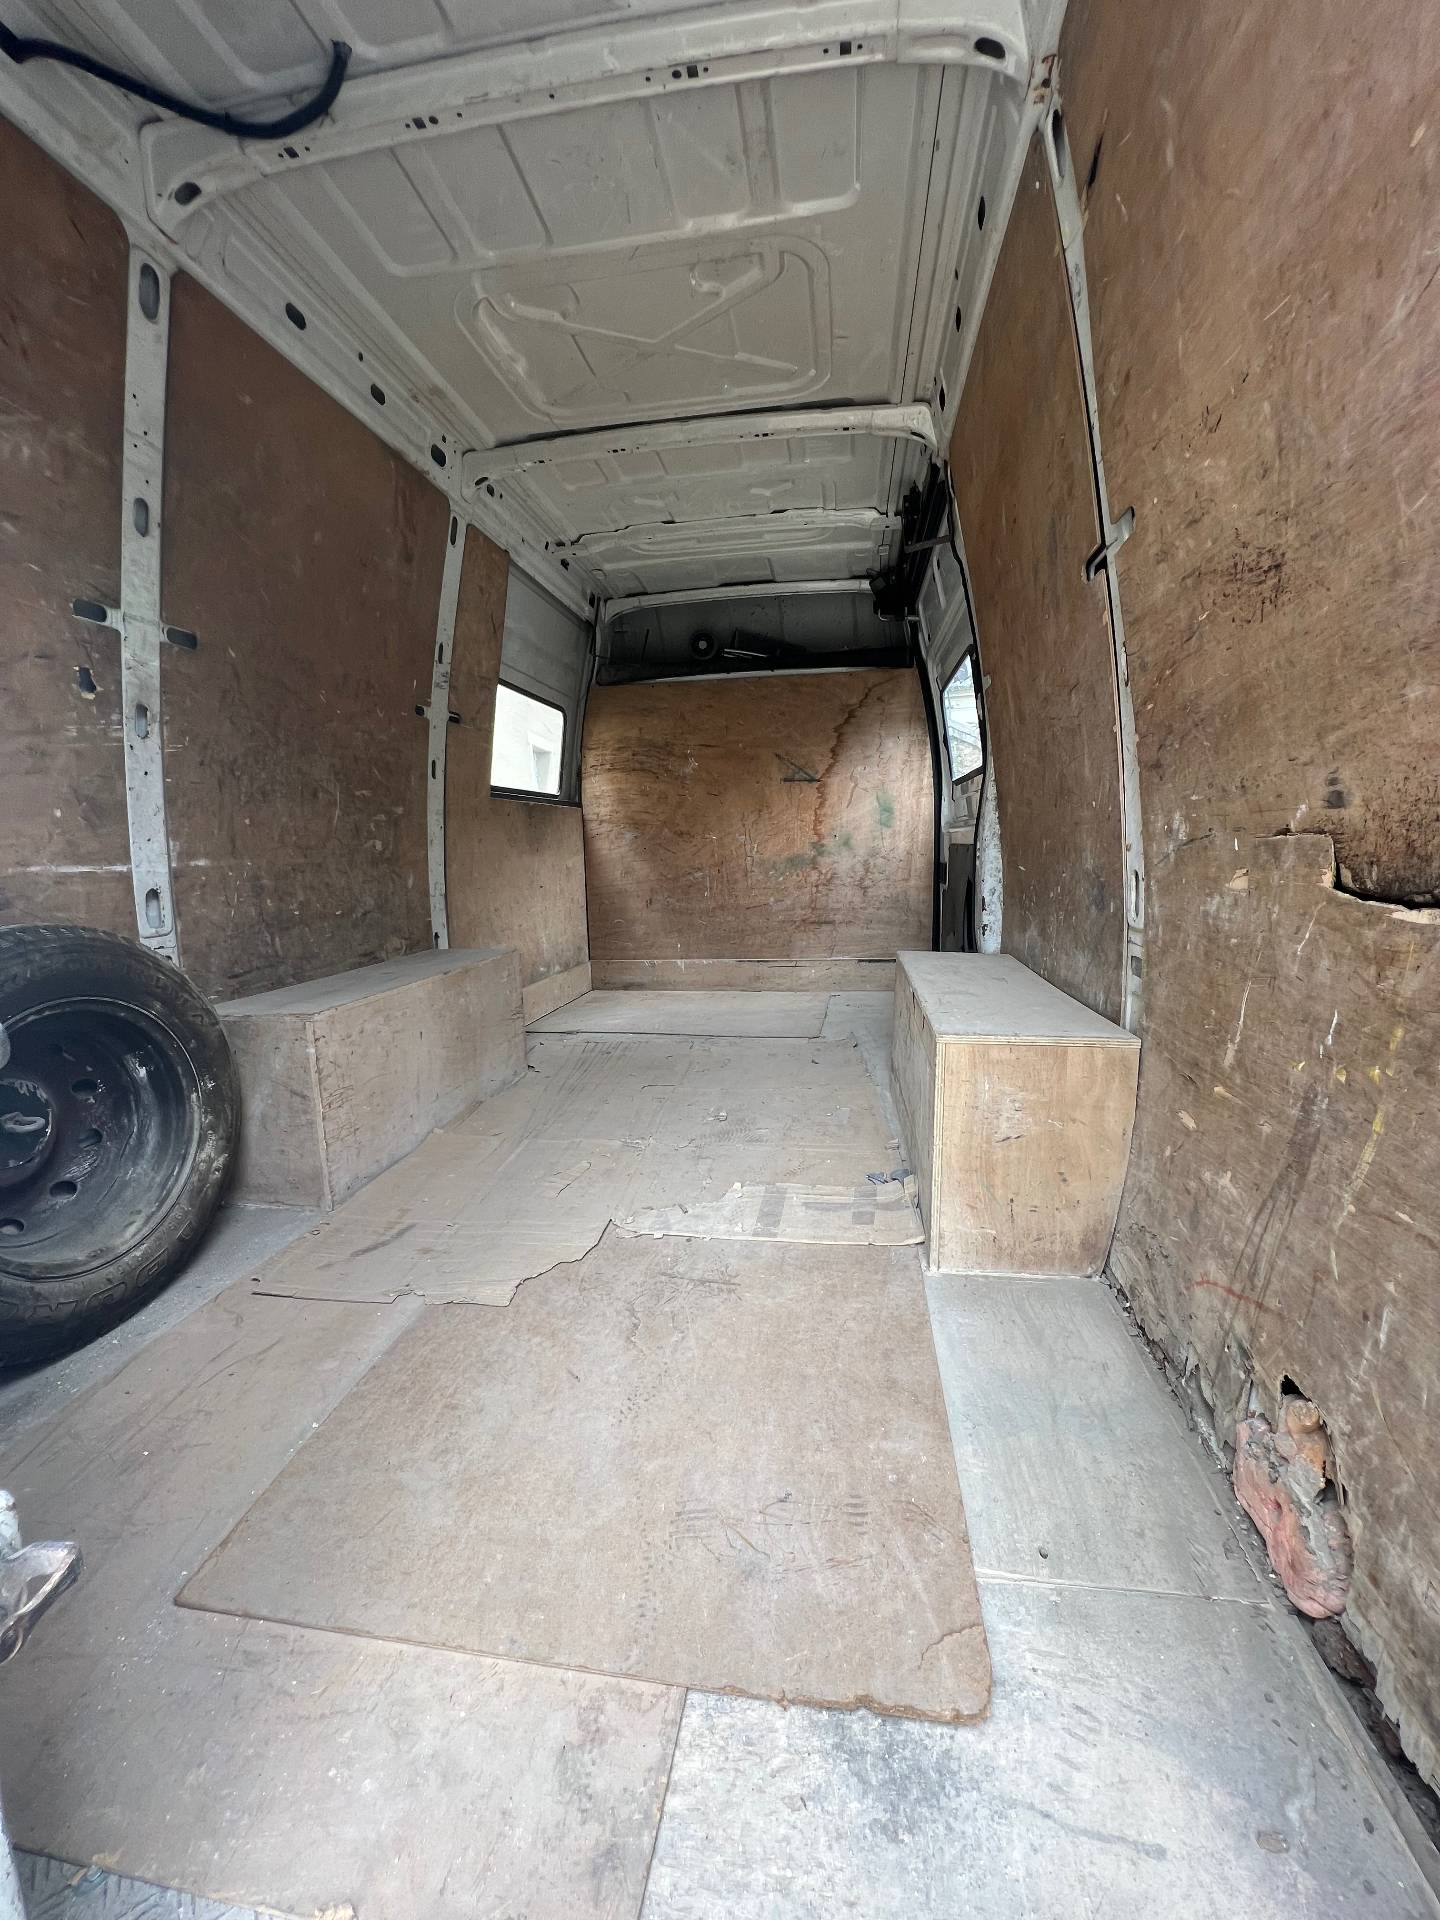 Iveco Daily 12m3